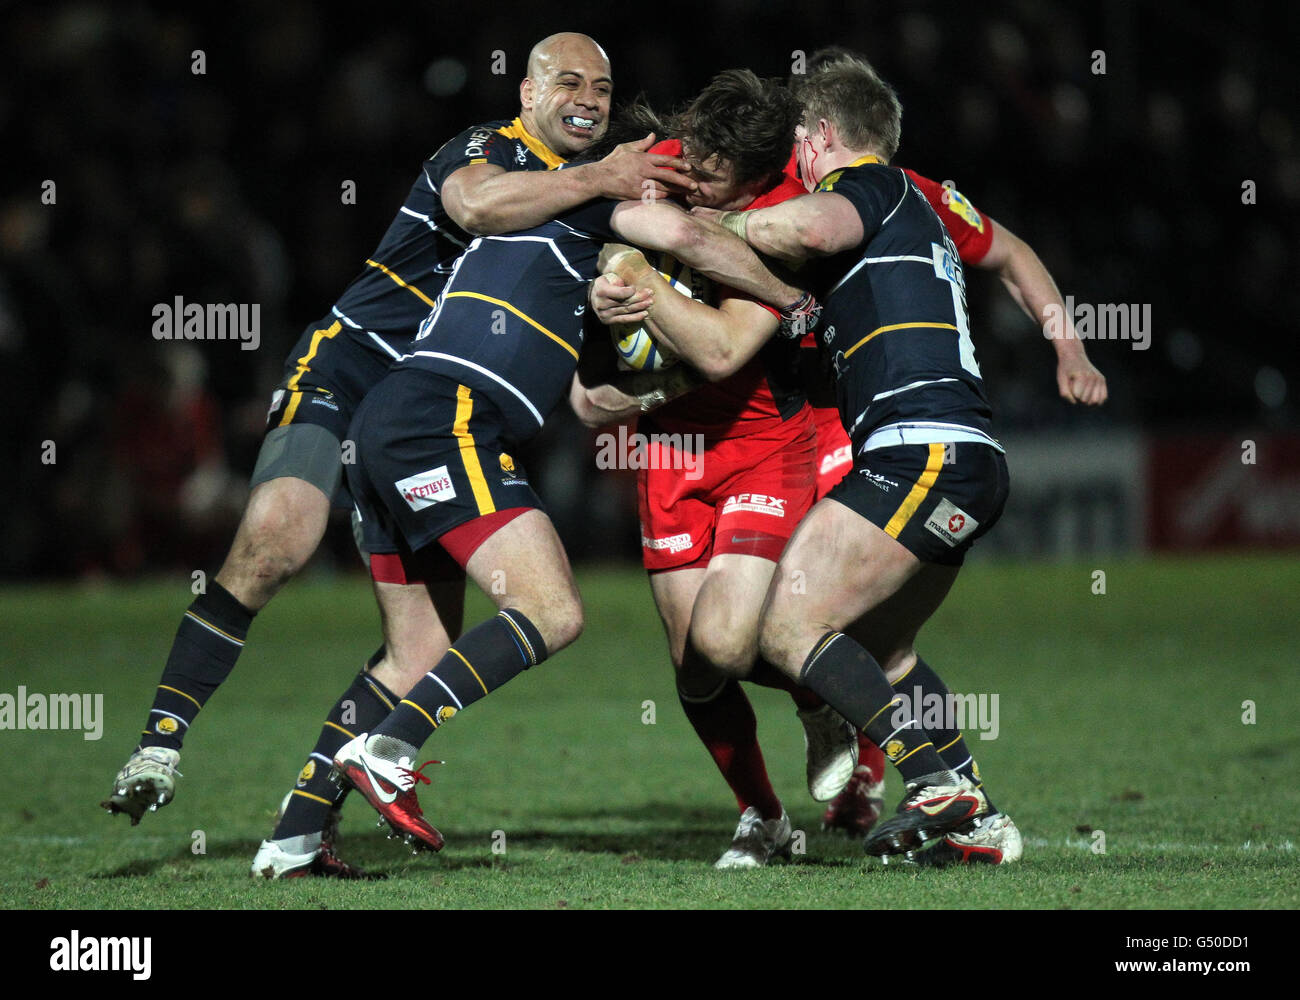 Saracens Chris Wyles is tackled by Worcester's Andy Goode, Jake Abbott and Dale Rasmussen during the Aviva Premiership match at Sixways Stadium, Worcester. Stock Photo